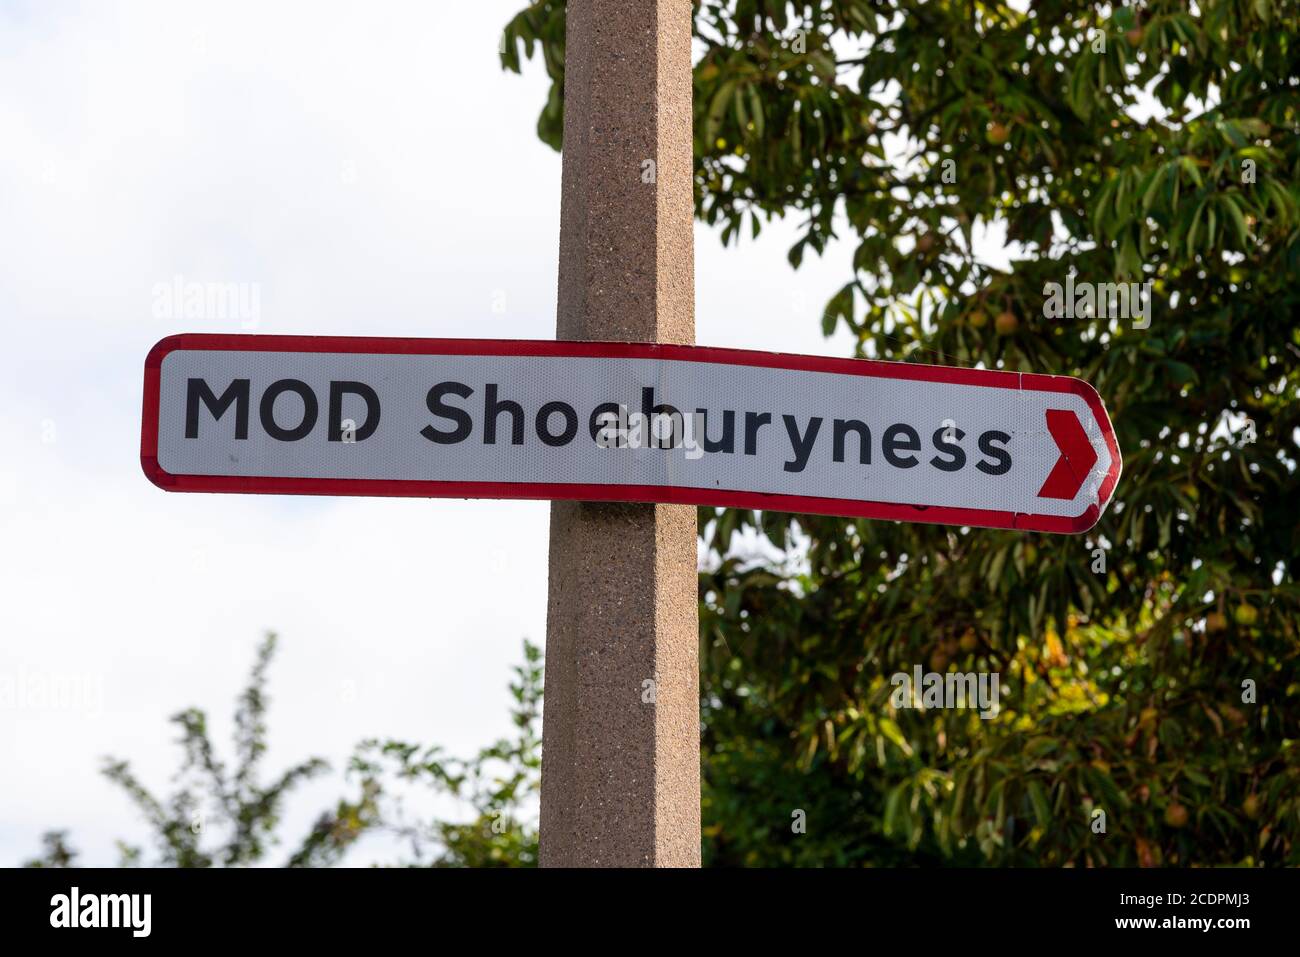 MOD Shoeburyness sign in Great Wakering, near Southend, Essex, UK. Lamp post sign post Stock Photo